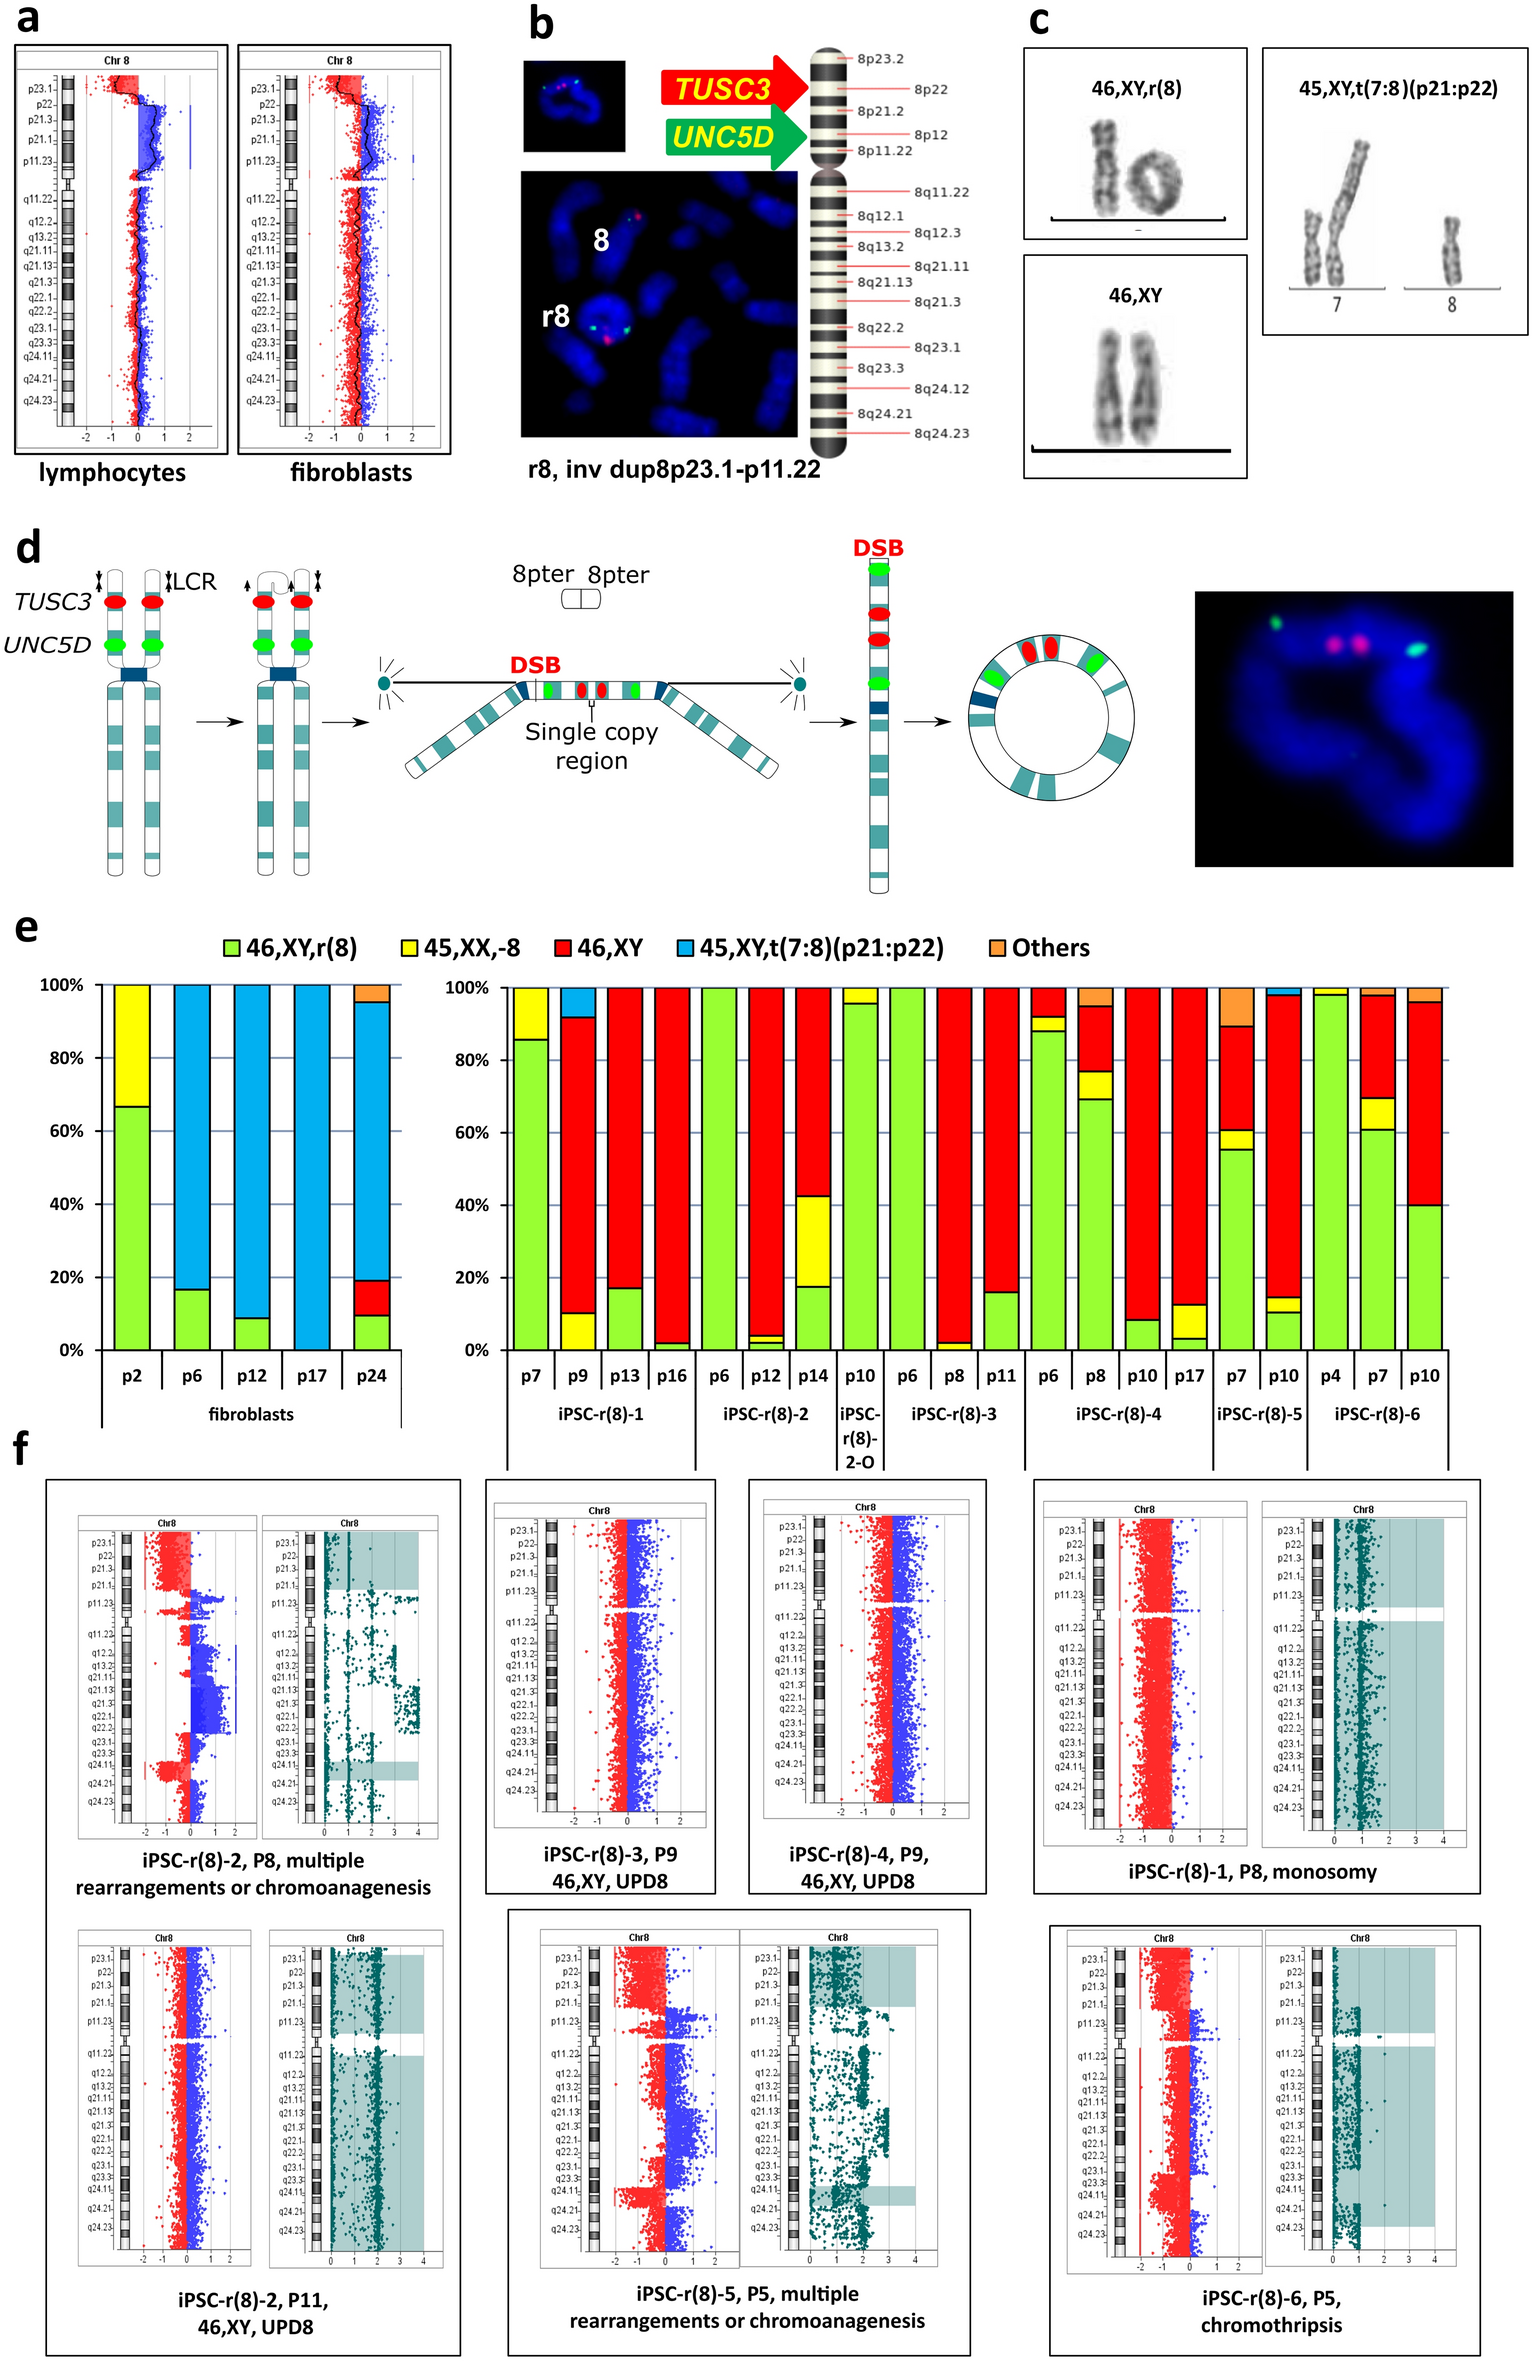 Complex biology of constitutional ring chromosomes structure and  (in)stability revealed by somatic cell reprogramming | Scientific Reports